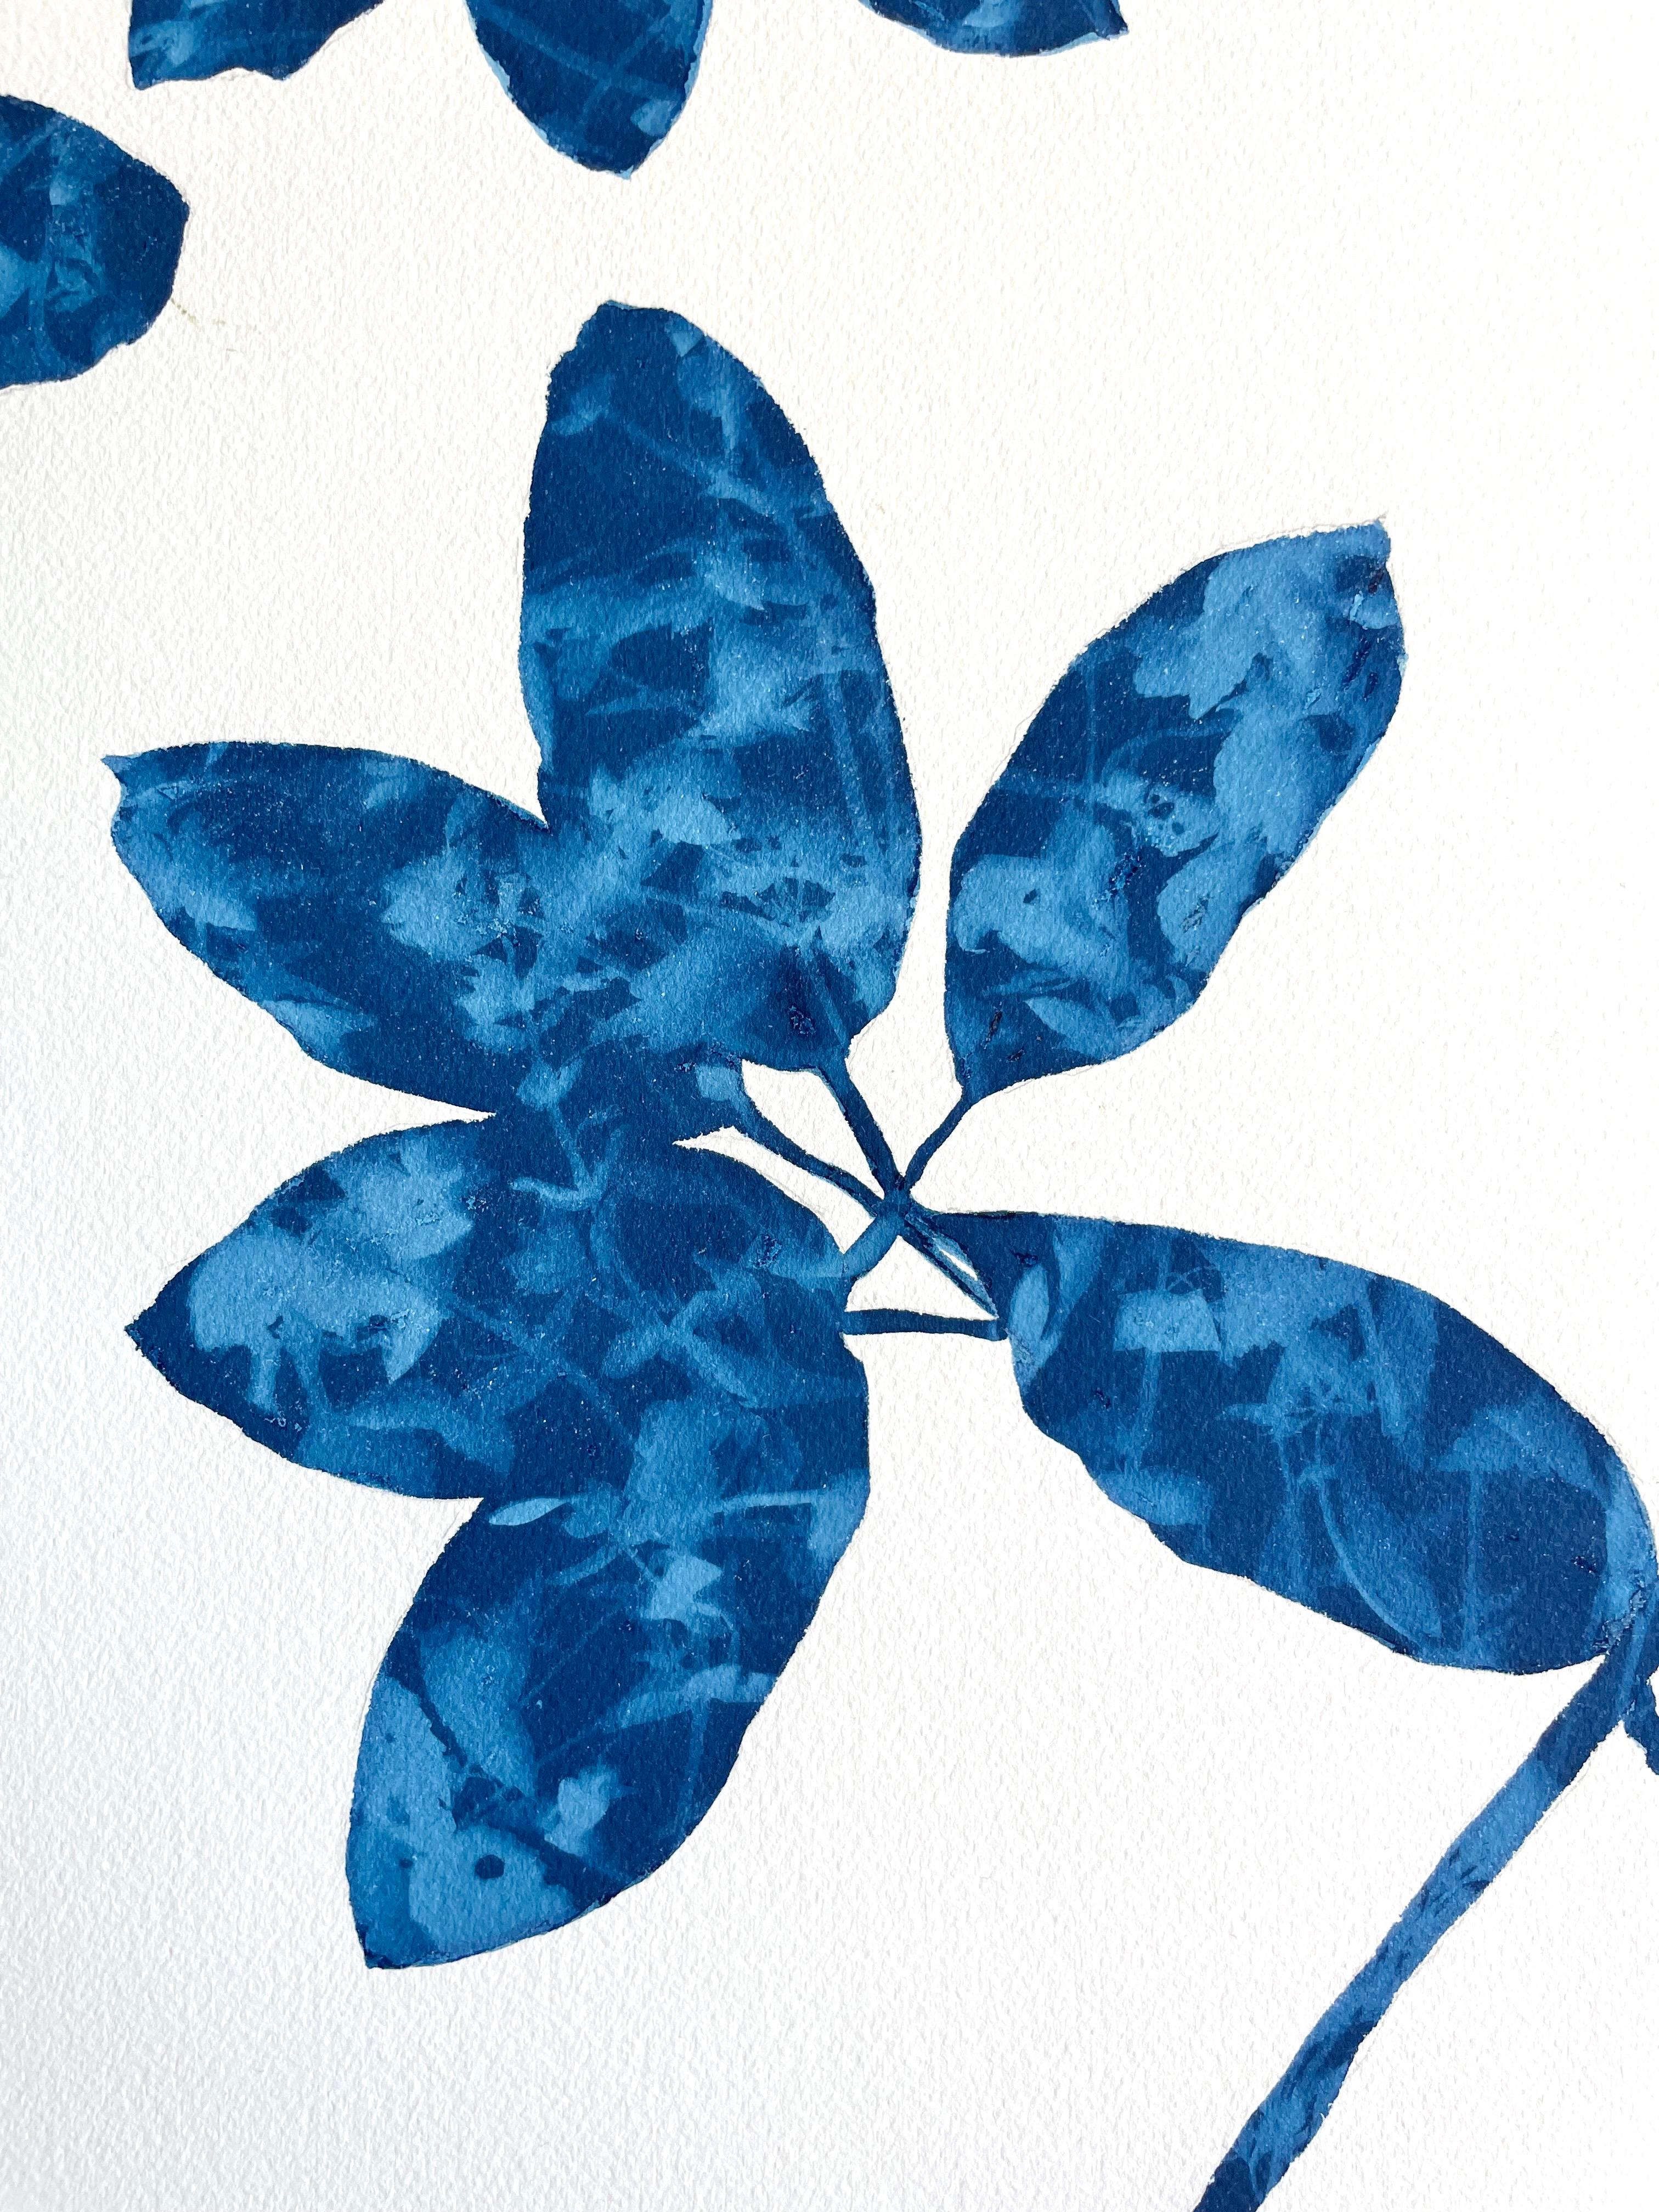 Delft Madrone II  (40 x 26 inch cyanotype painting) For Sale 2